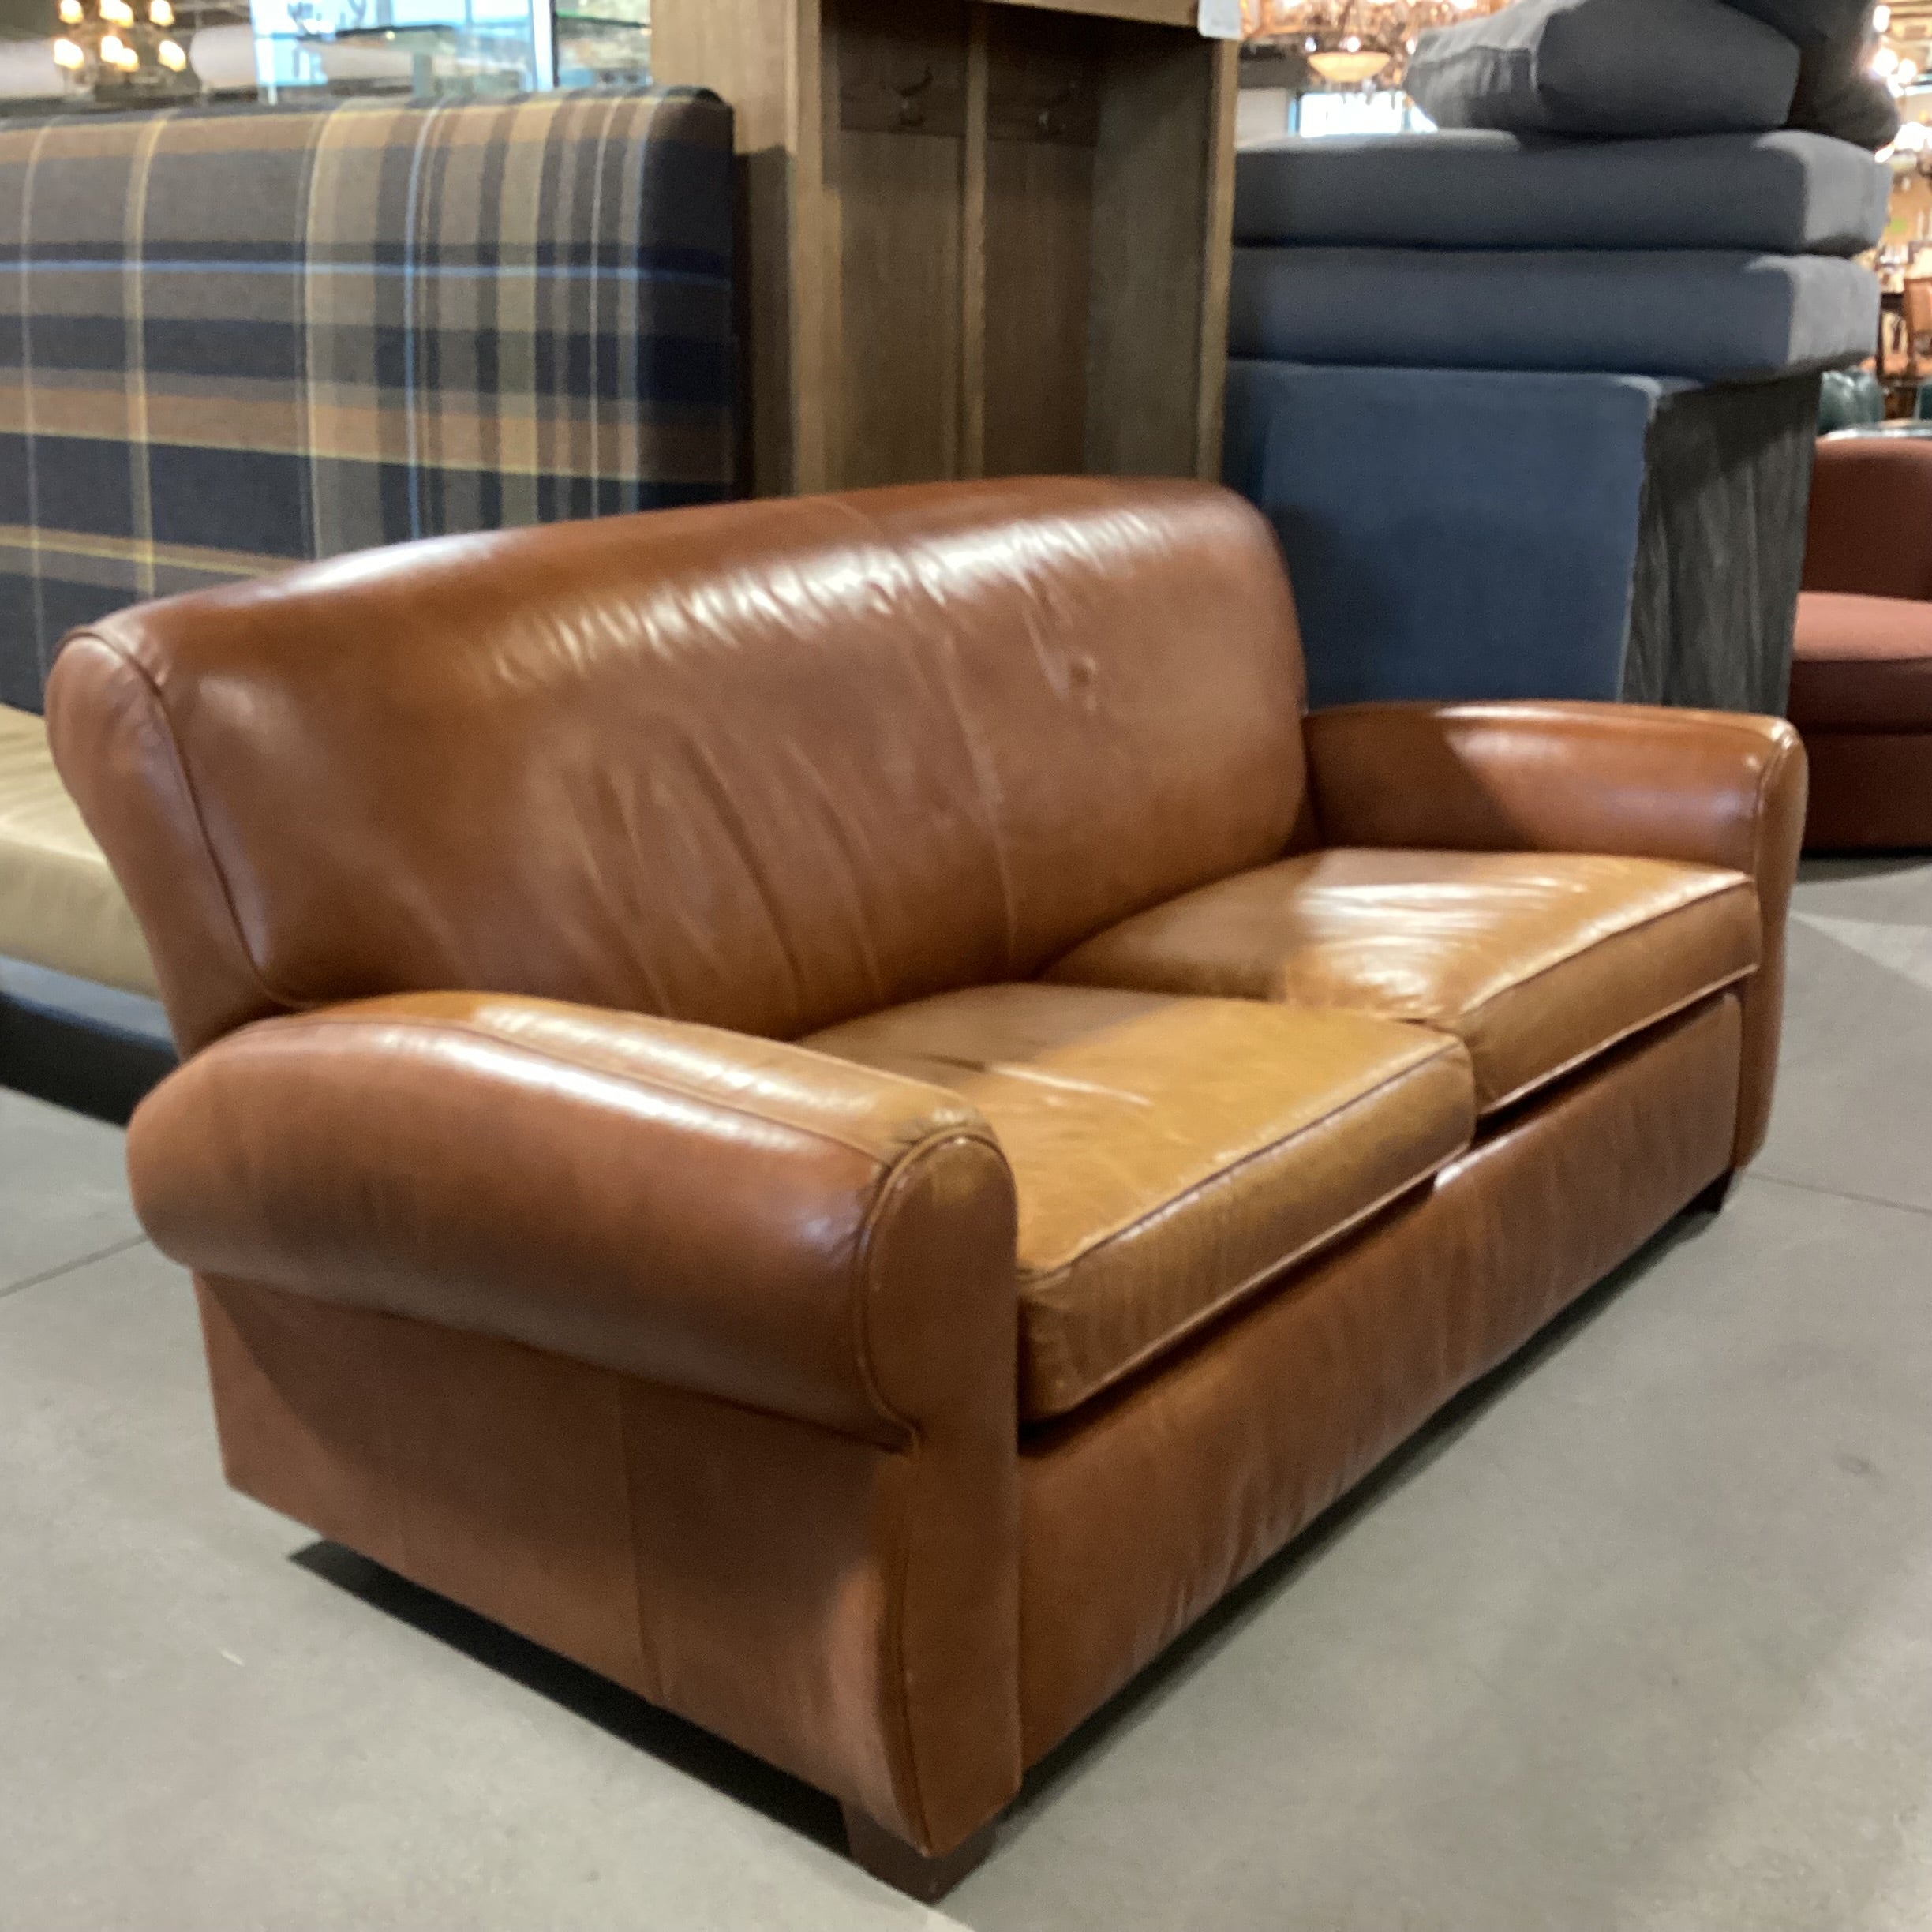 Barca Lounger Brown Leather Sofa 78"x 40"x 35"